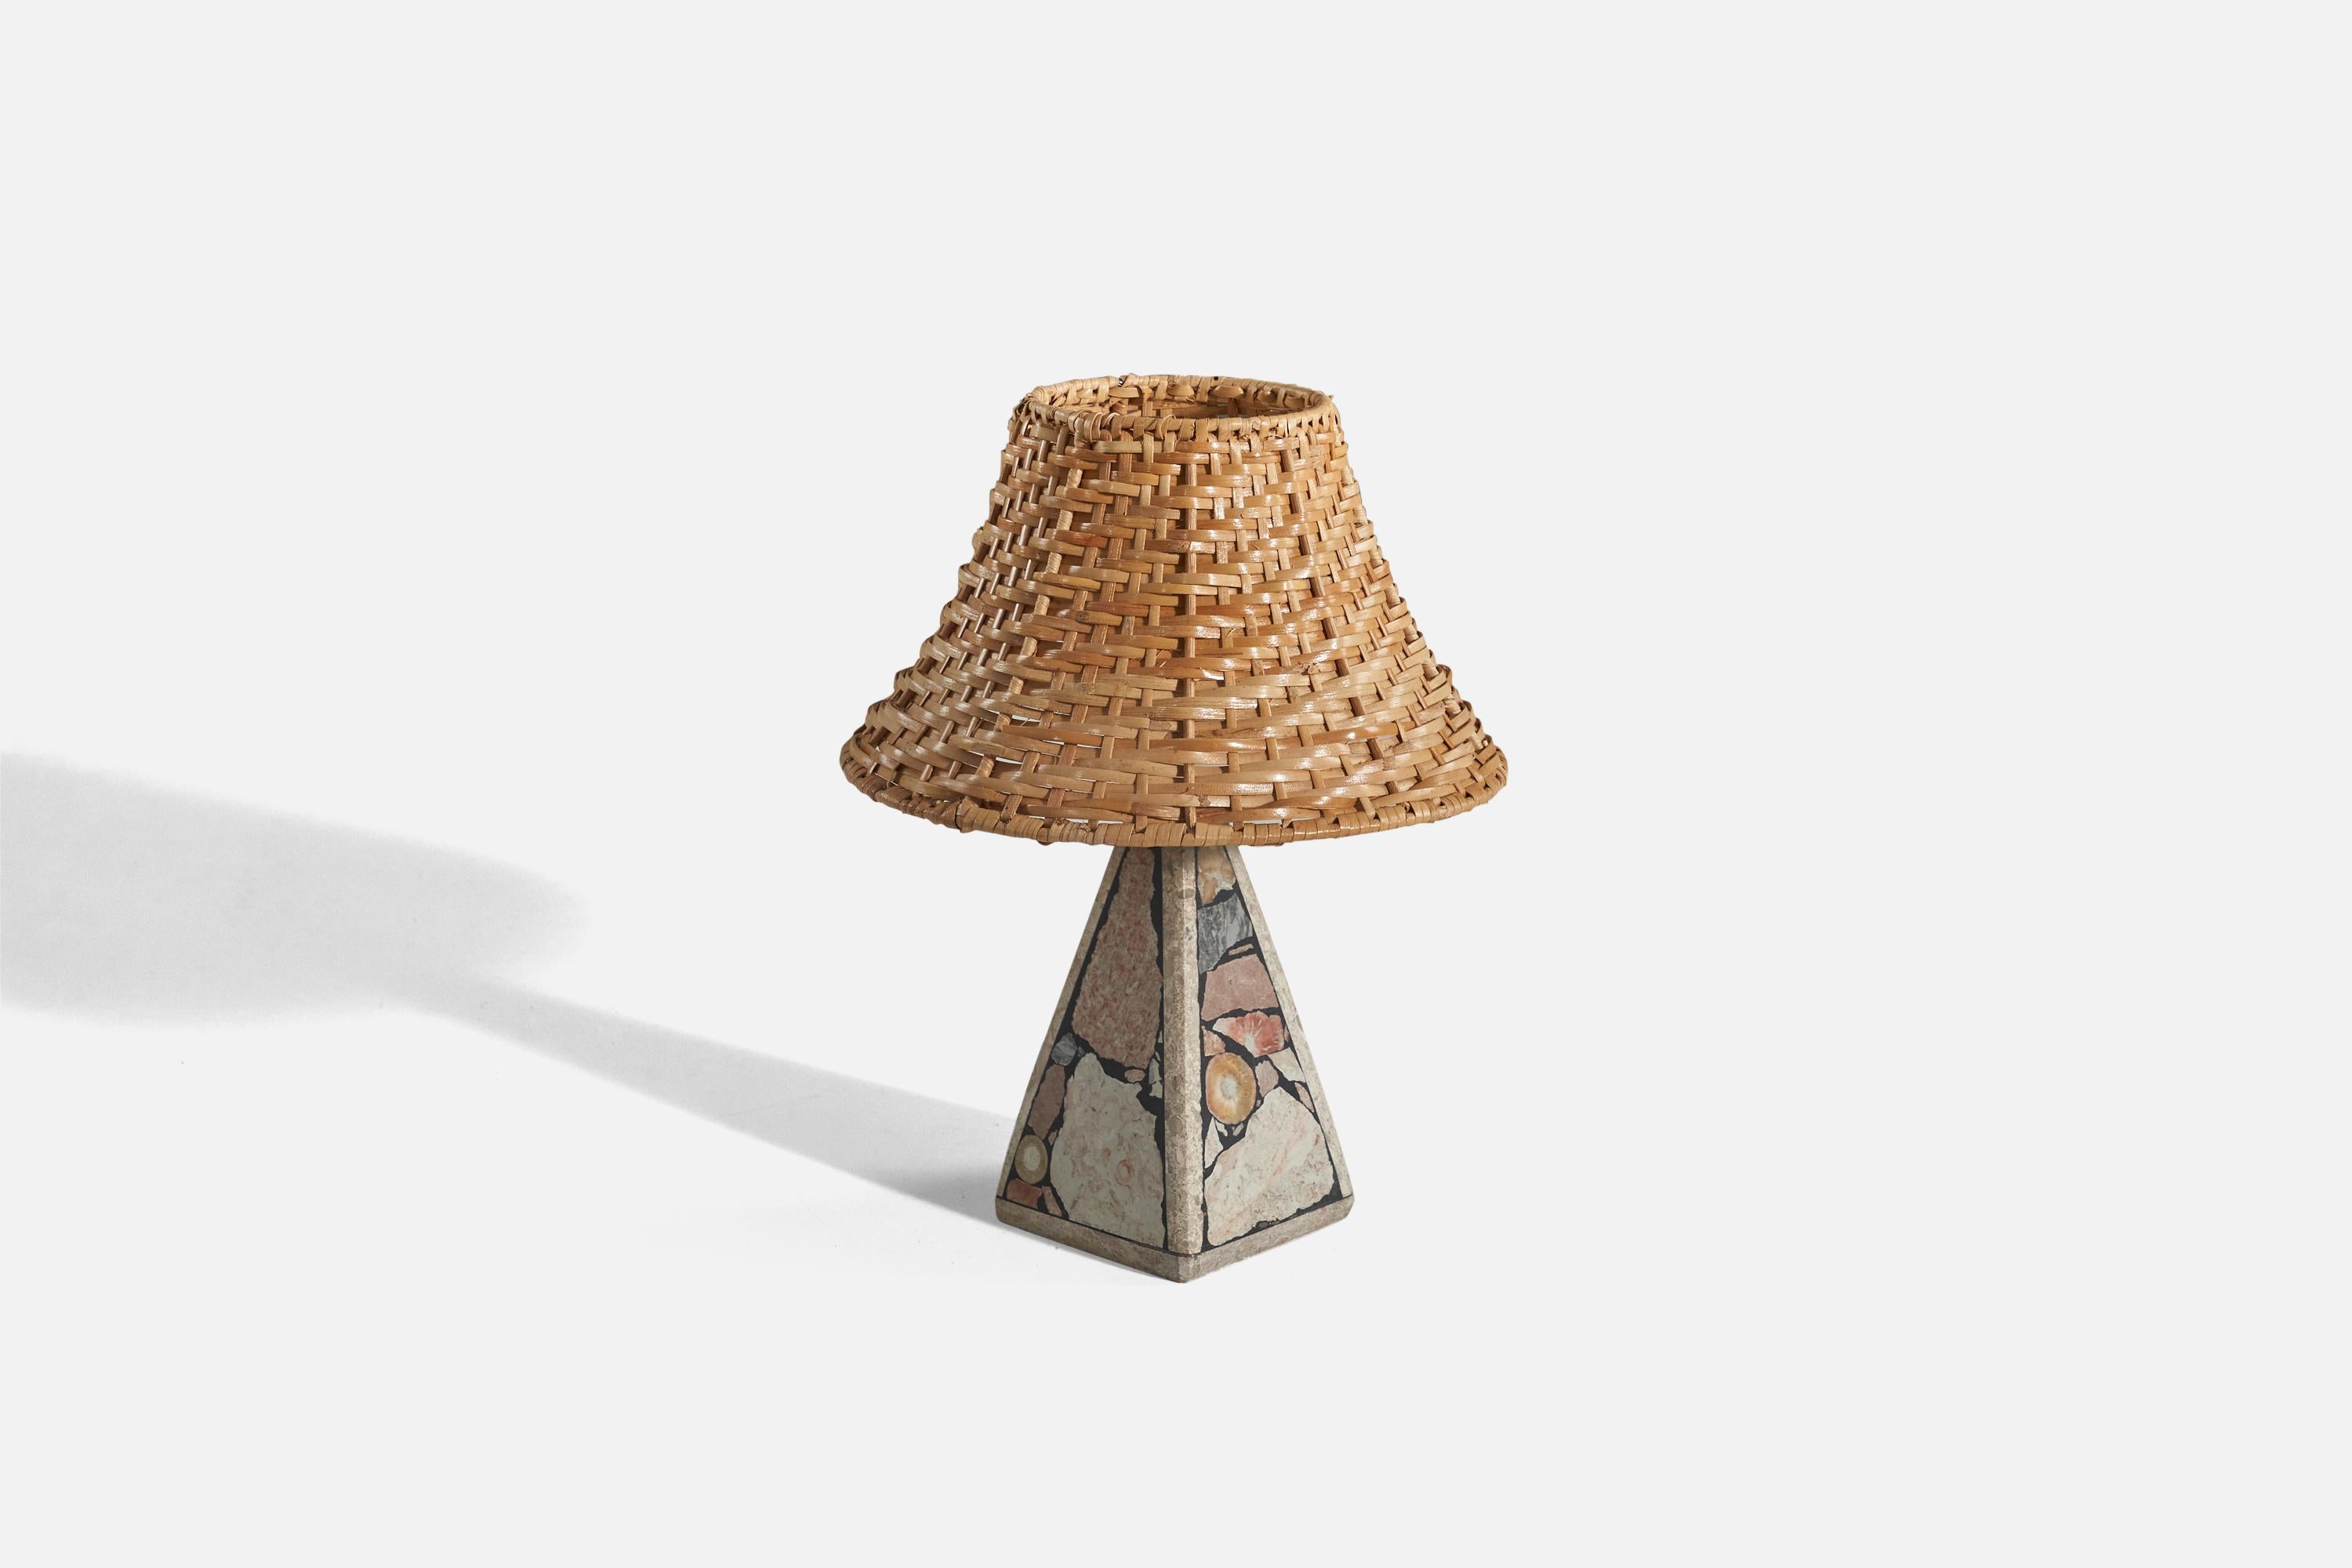 A solid stone table lamp with fossil pieces, Pietra Dura technique, designed and produced in Sweden, c. 1970s.

Sold with rattan lampshade. 
Dimensions of Lamp (inches) : 8.25 x 3.48 x 3.5 (Height x Width x Depth)
Dimensions of Shade (inches) :